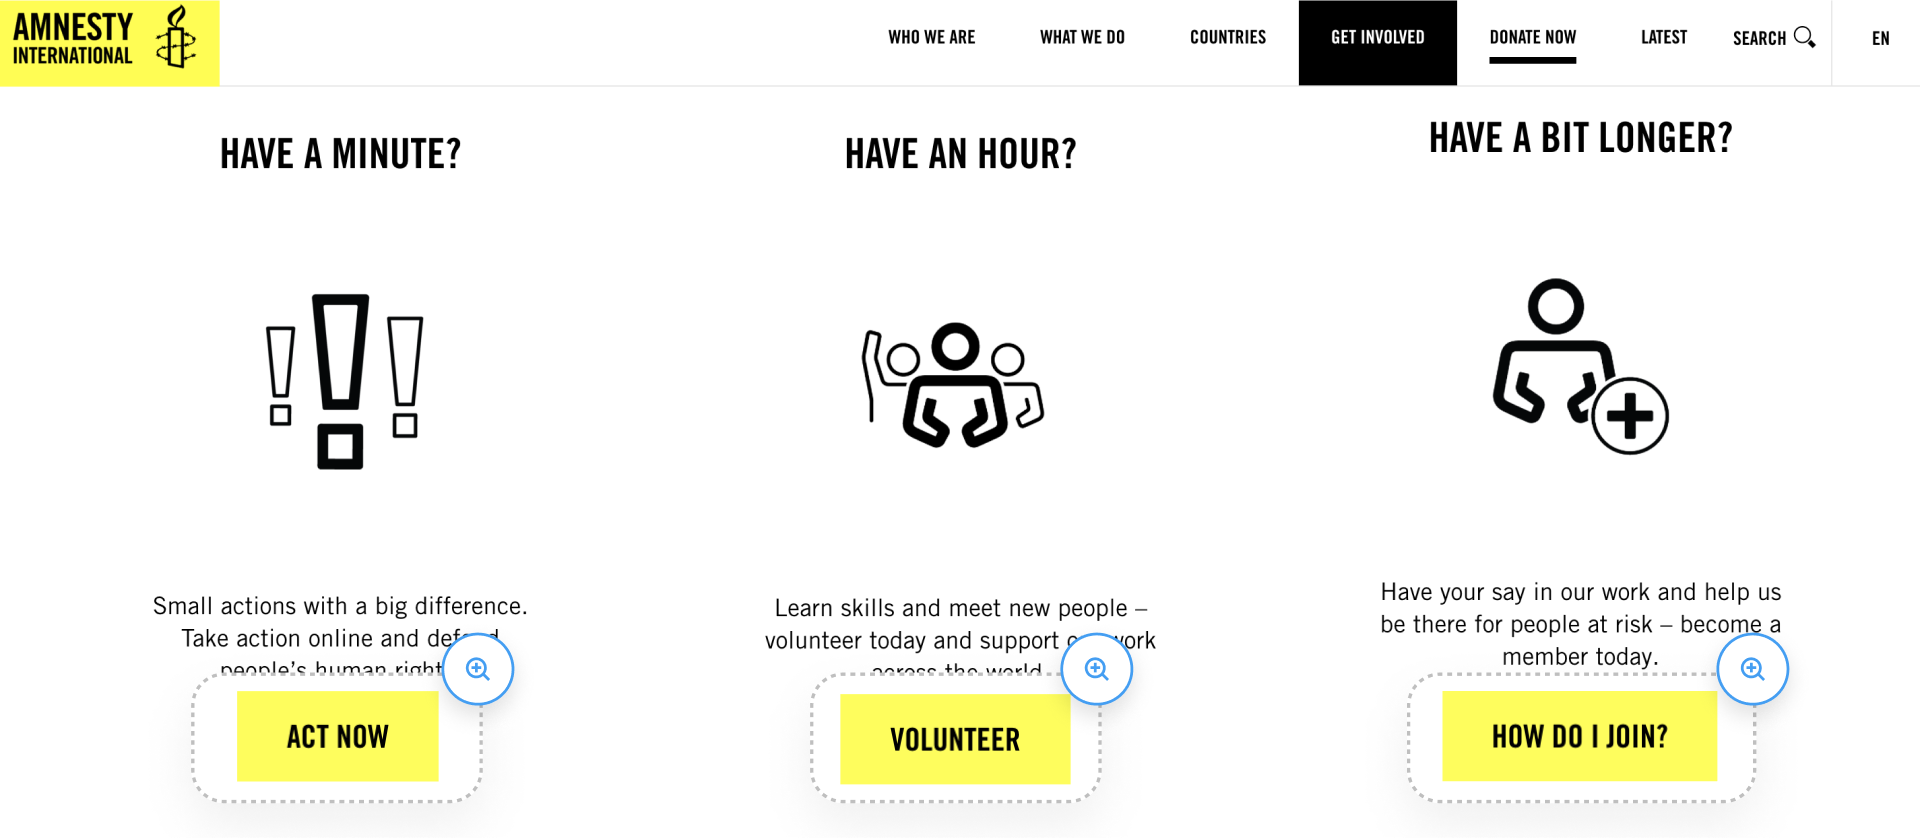 Amnesty International landing page screenshot with three yellow call-to-action buttons saying ACT NOW, VOLUNTEER, and HOW DO I JOIN?